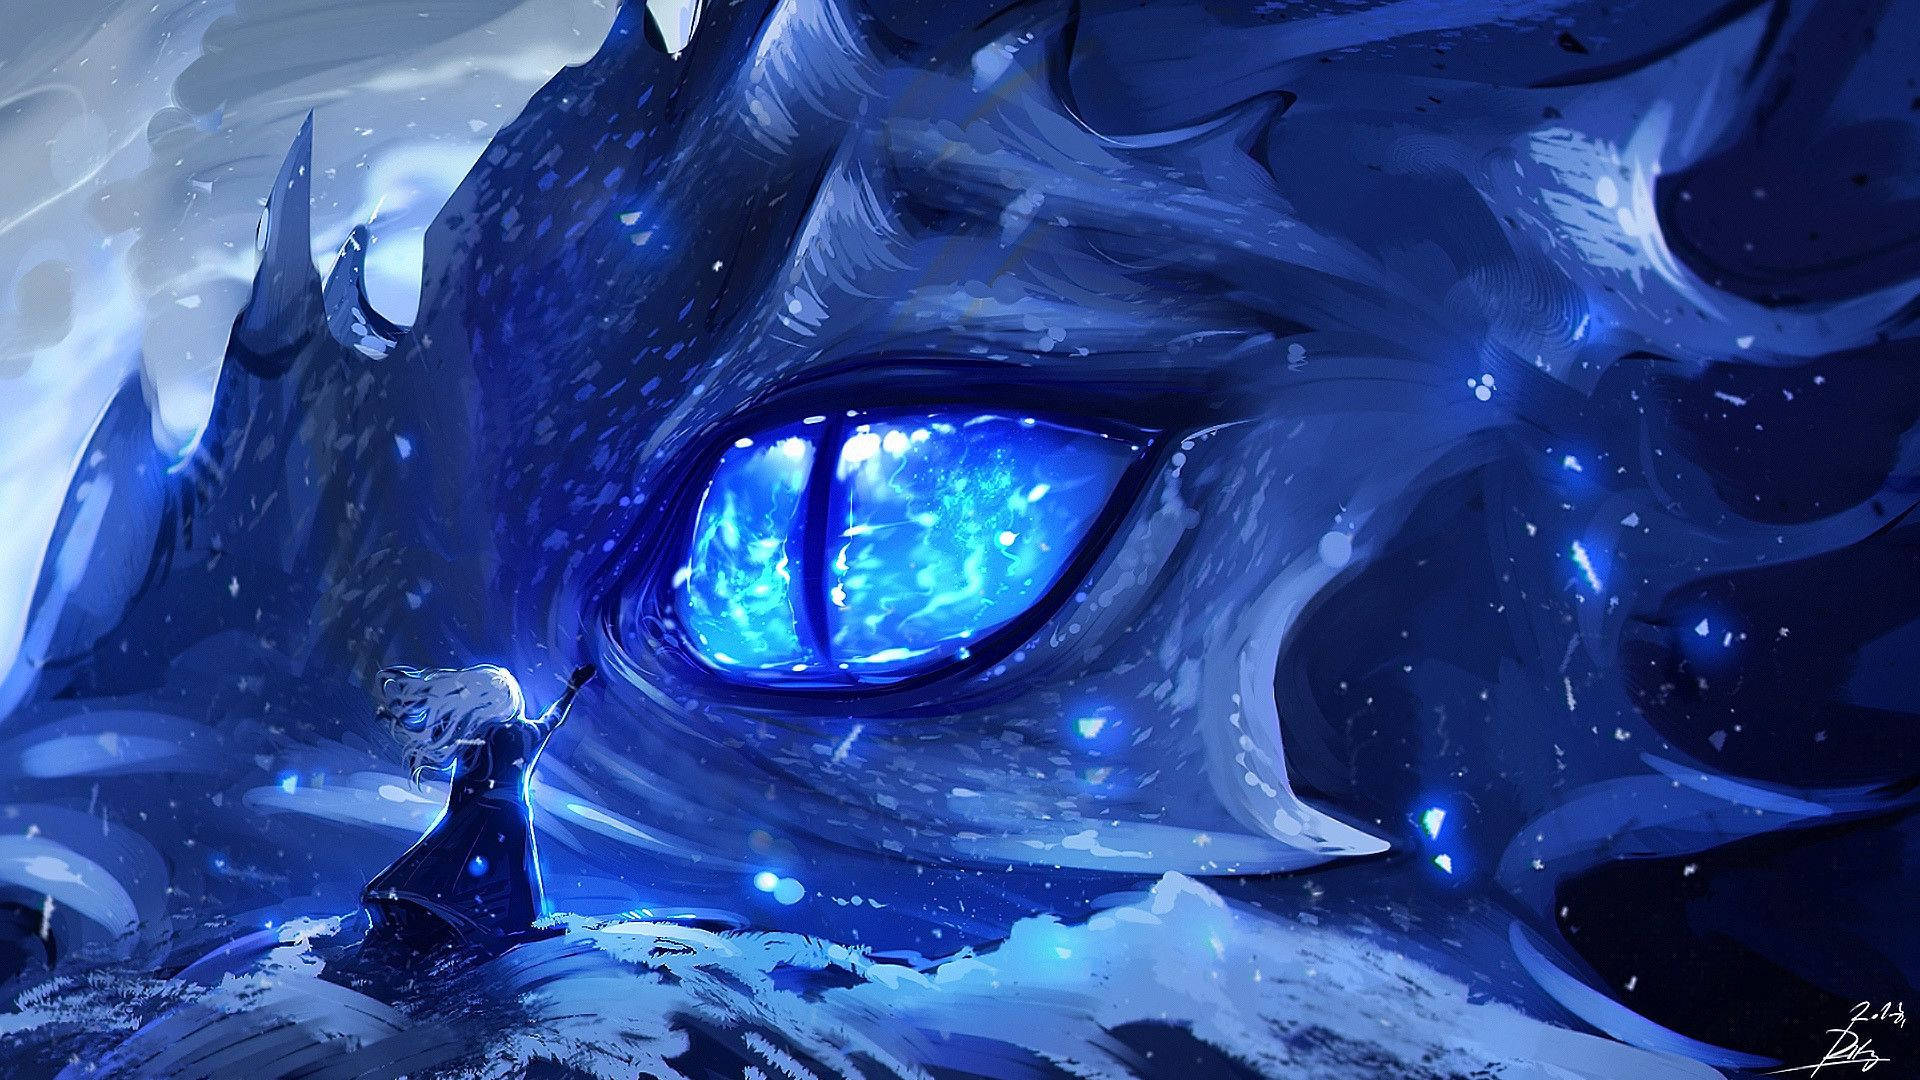 Anime Blue Girl With Dragon Background